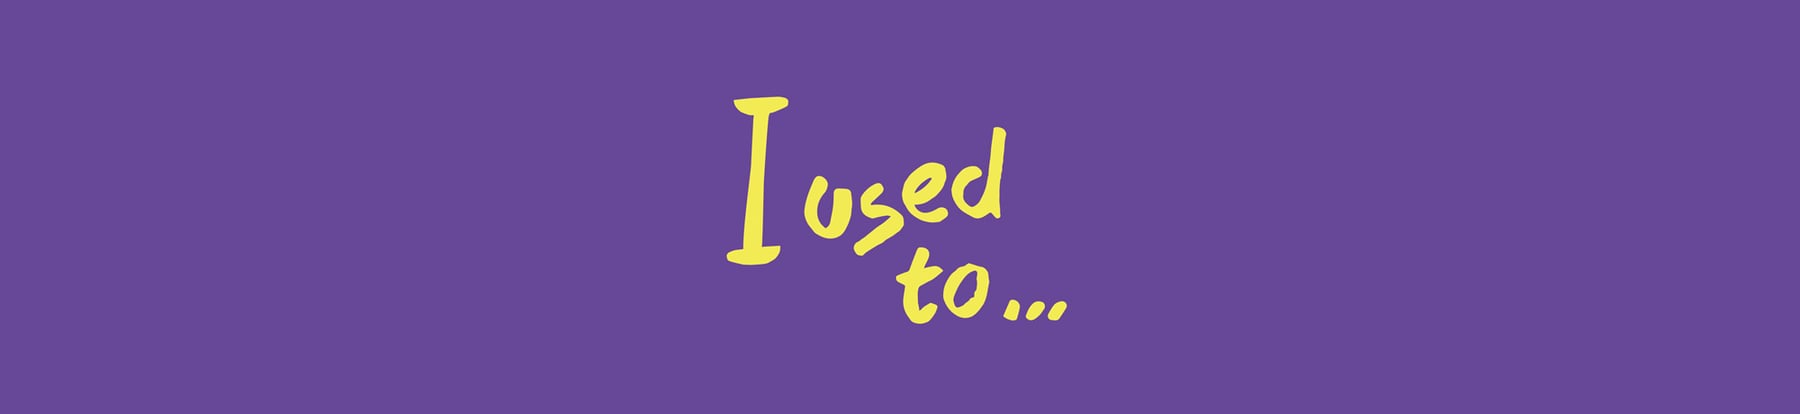 I used to....